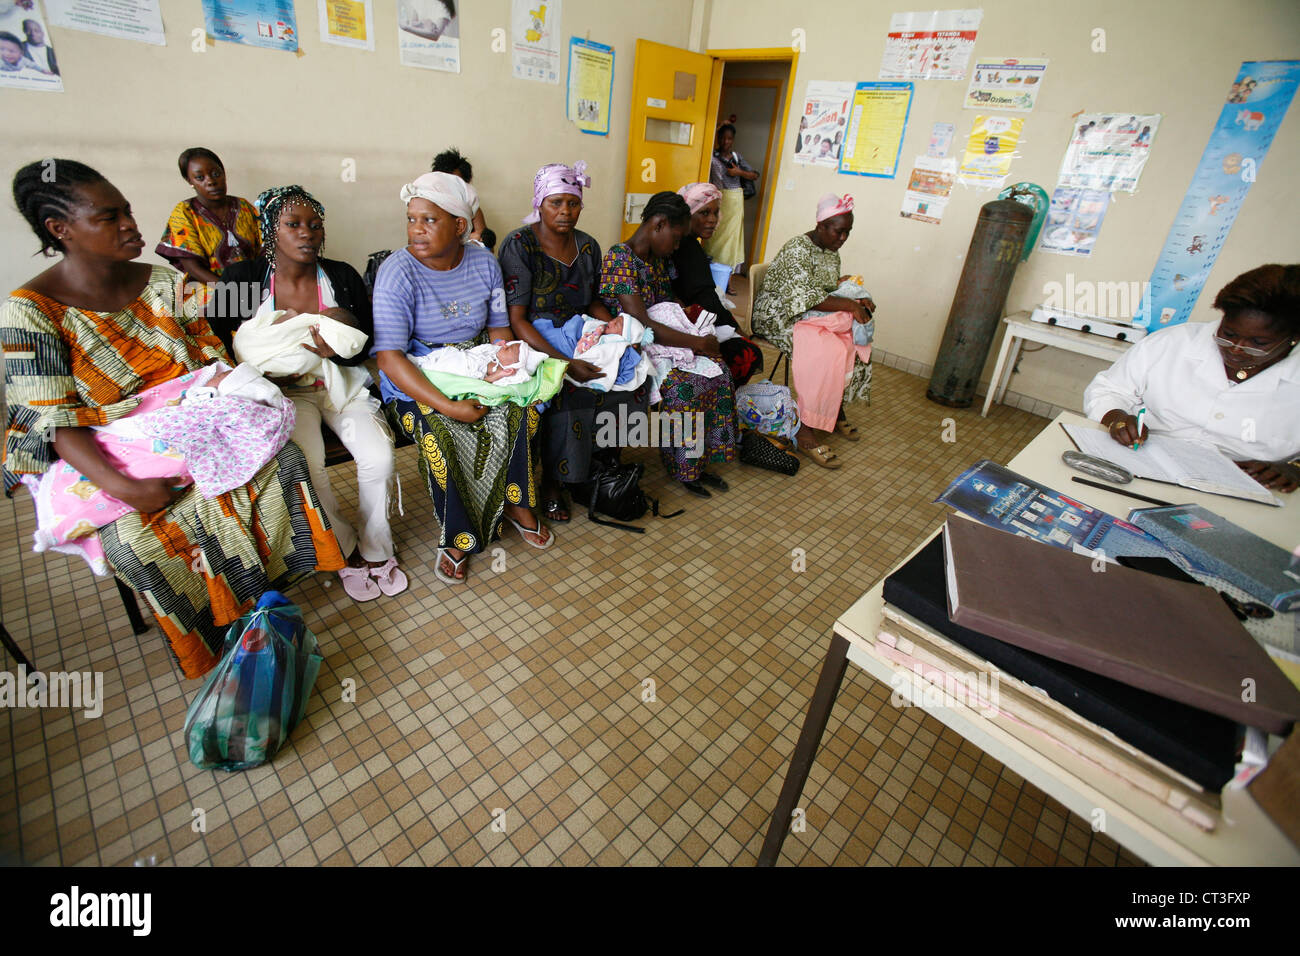 A HOSPITAL IN AFRICA Stock Photo